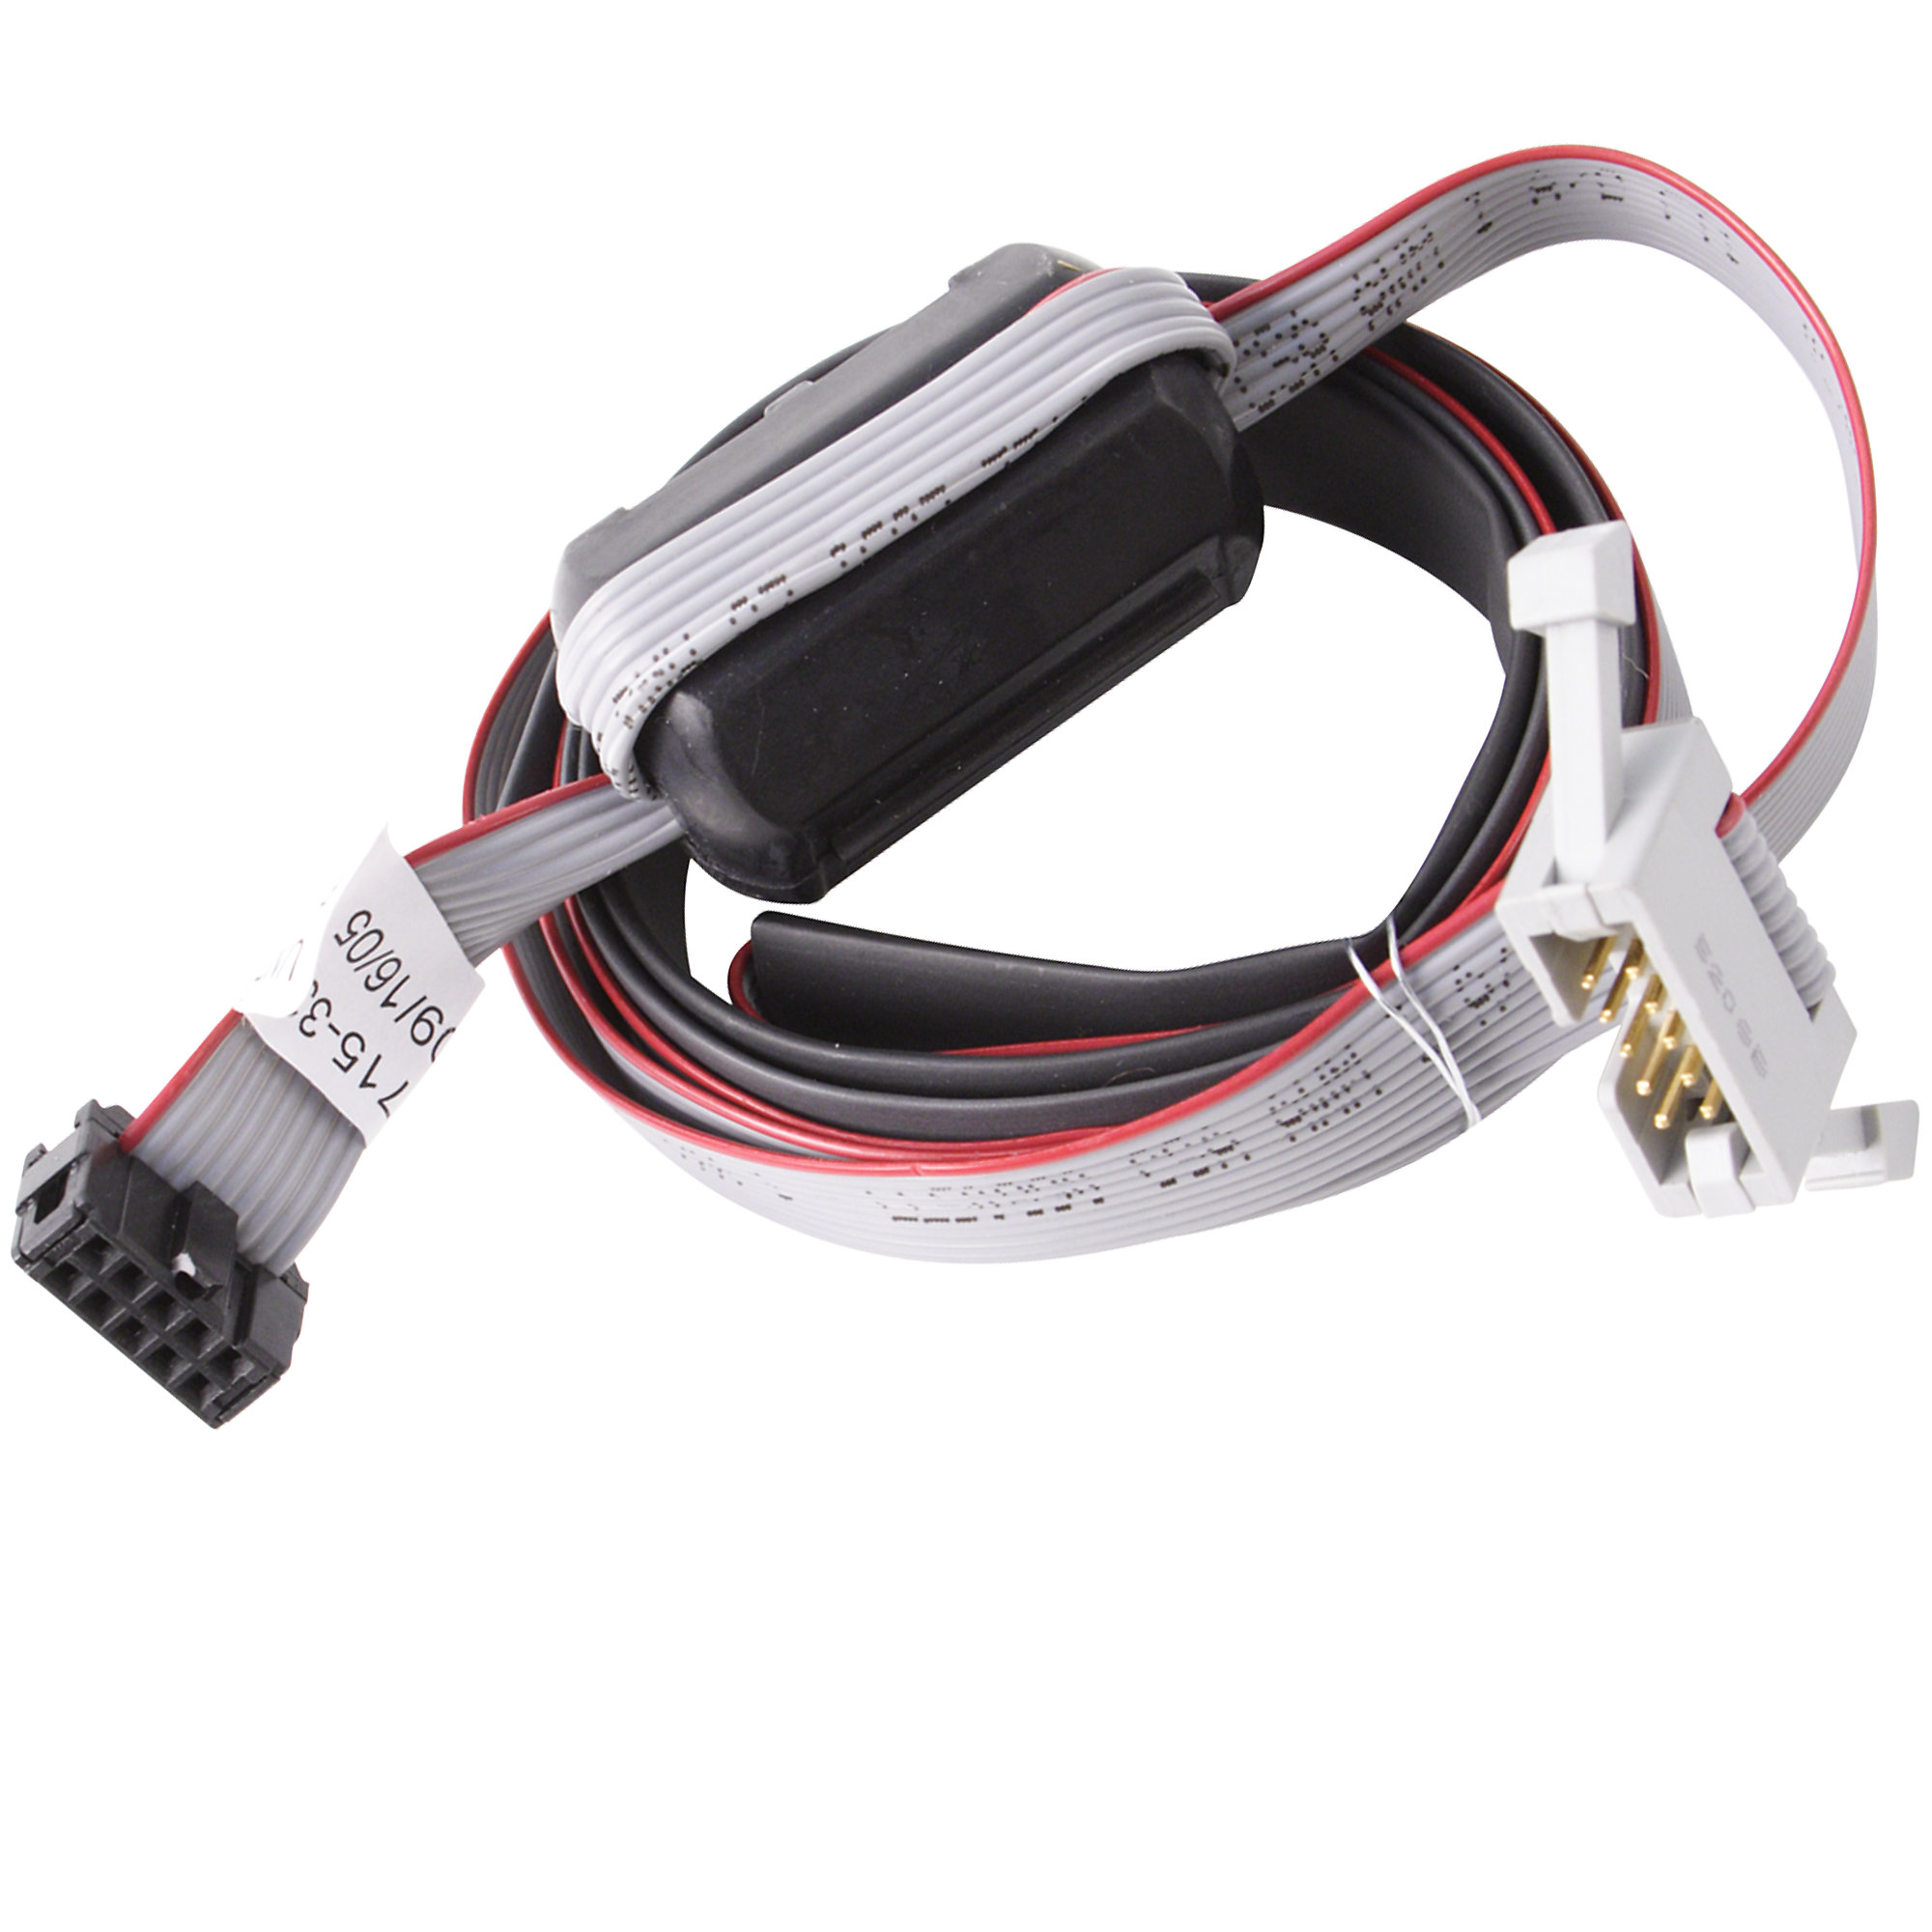 Lower Display Cable, M/F, Connects between Motor Control Board (MCB) and Upper Display Cable